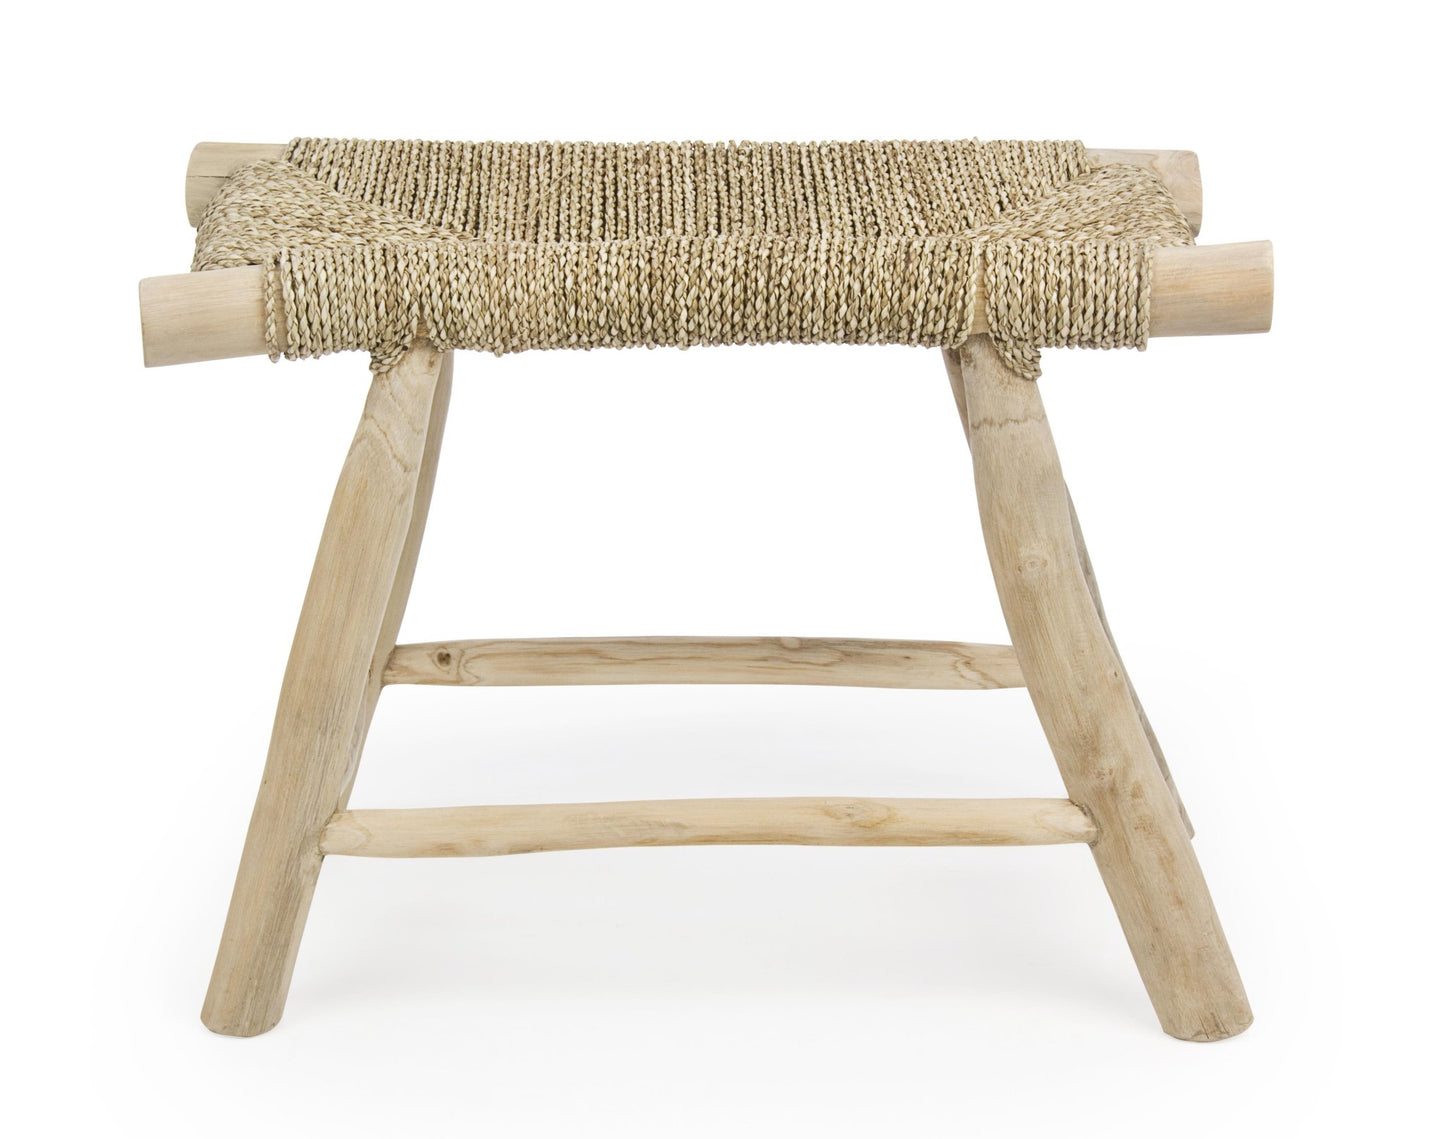 Handcrafted Teak Wood and Weave Footrest Stool - LoNiu Home